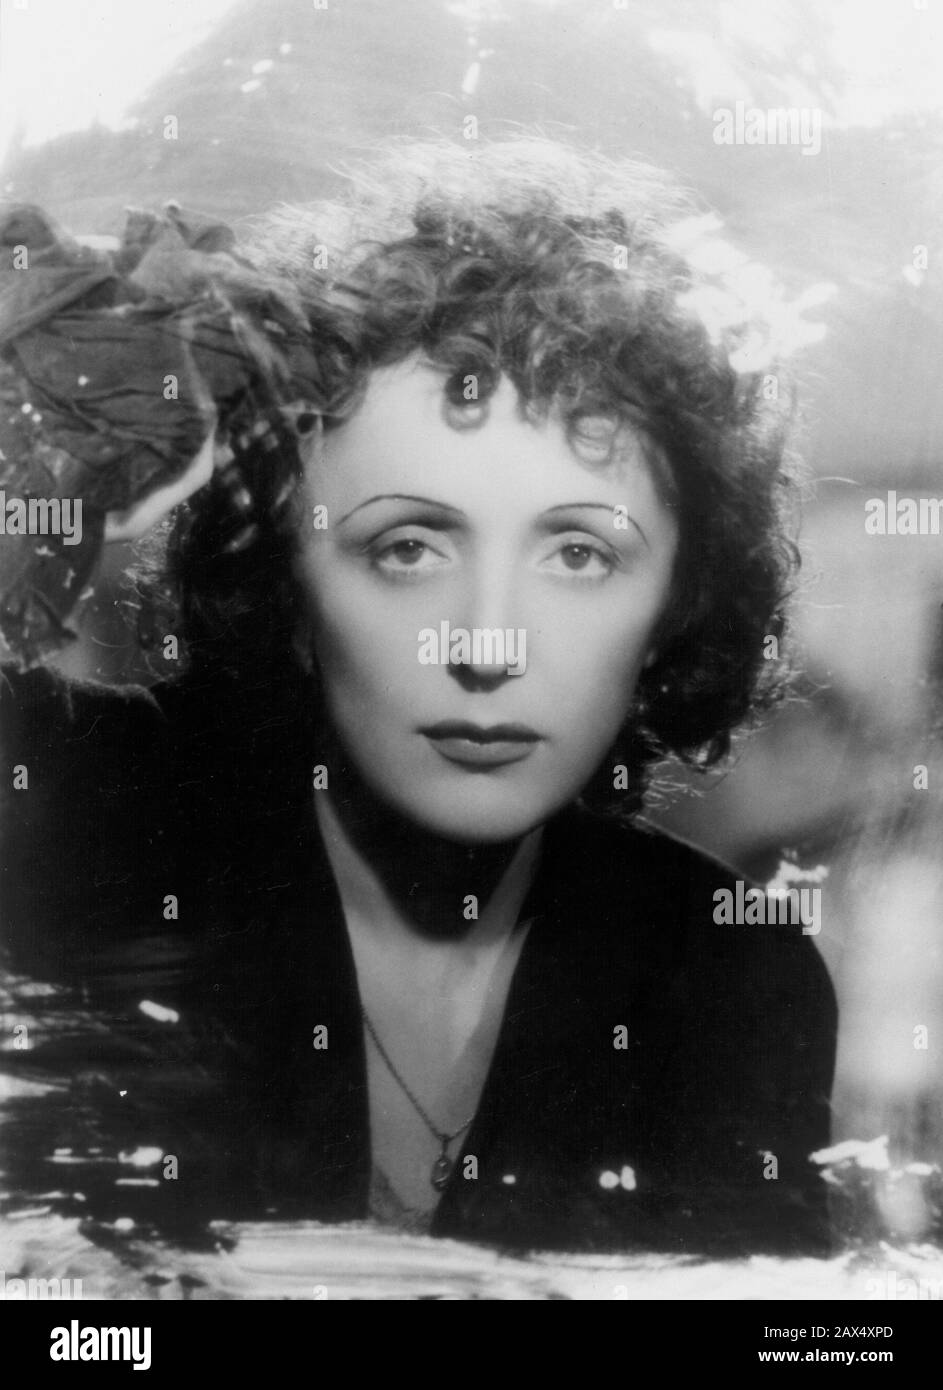 1941 , ITALY : The celebrated french singer  EDITH PIAF ( born Giovanna Gassion , 1915 - 1963 )  in the movie   MONTMARTRE-sur-SEINE by  Georges Lacombe - cantante - actress - attrice - MOVIE - CINEMA - FILM - finestra - window  - esistenzialismo - esistenzialista - existentialist - existentialism - riccioli - curls ----  Archivio GBB Stock Photo